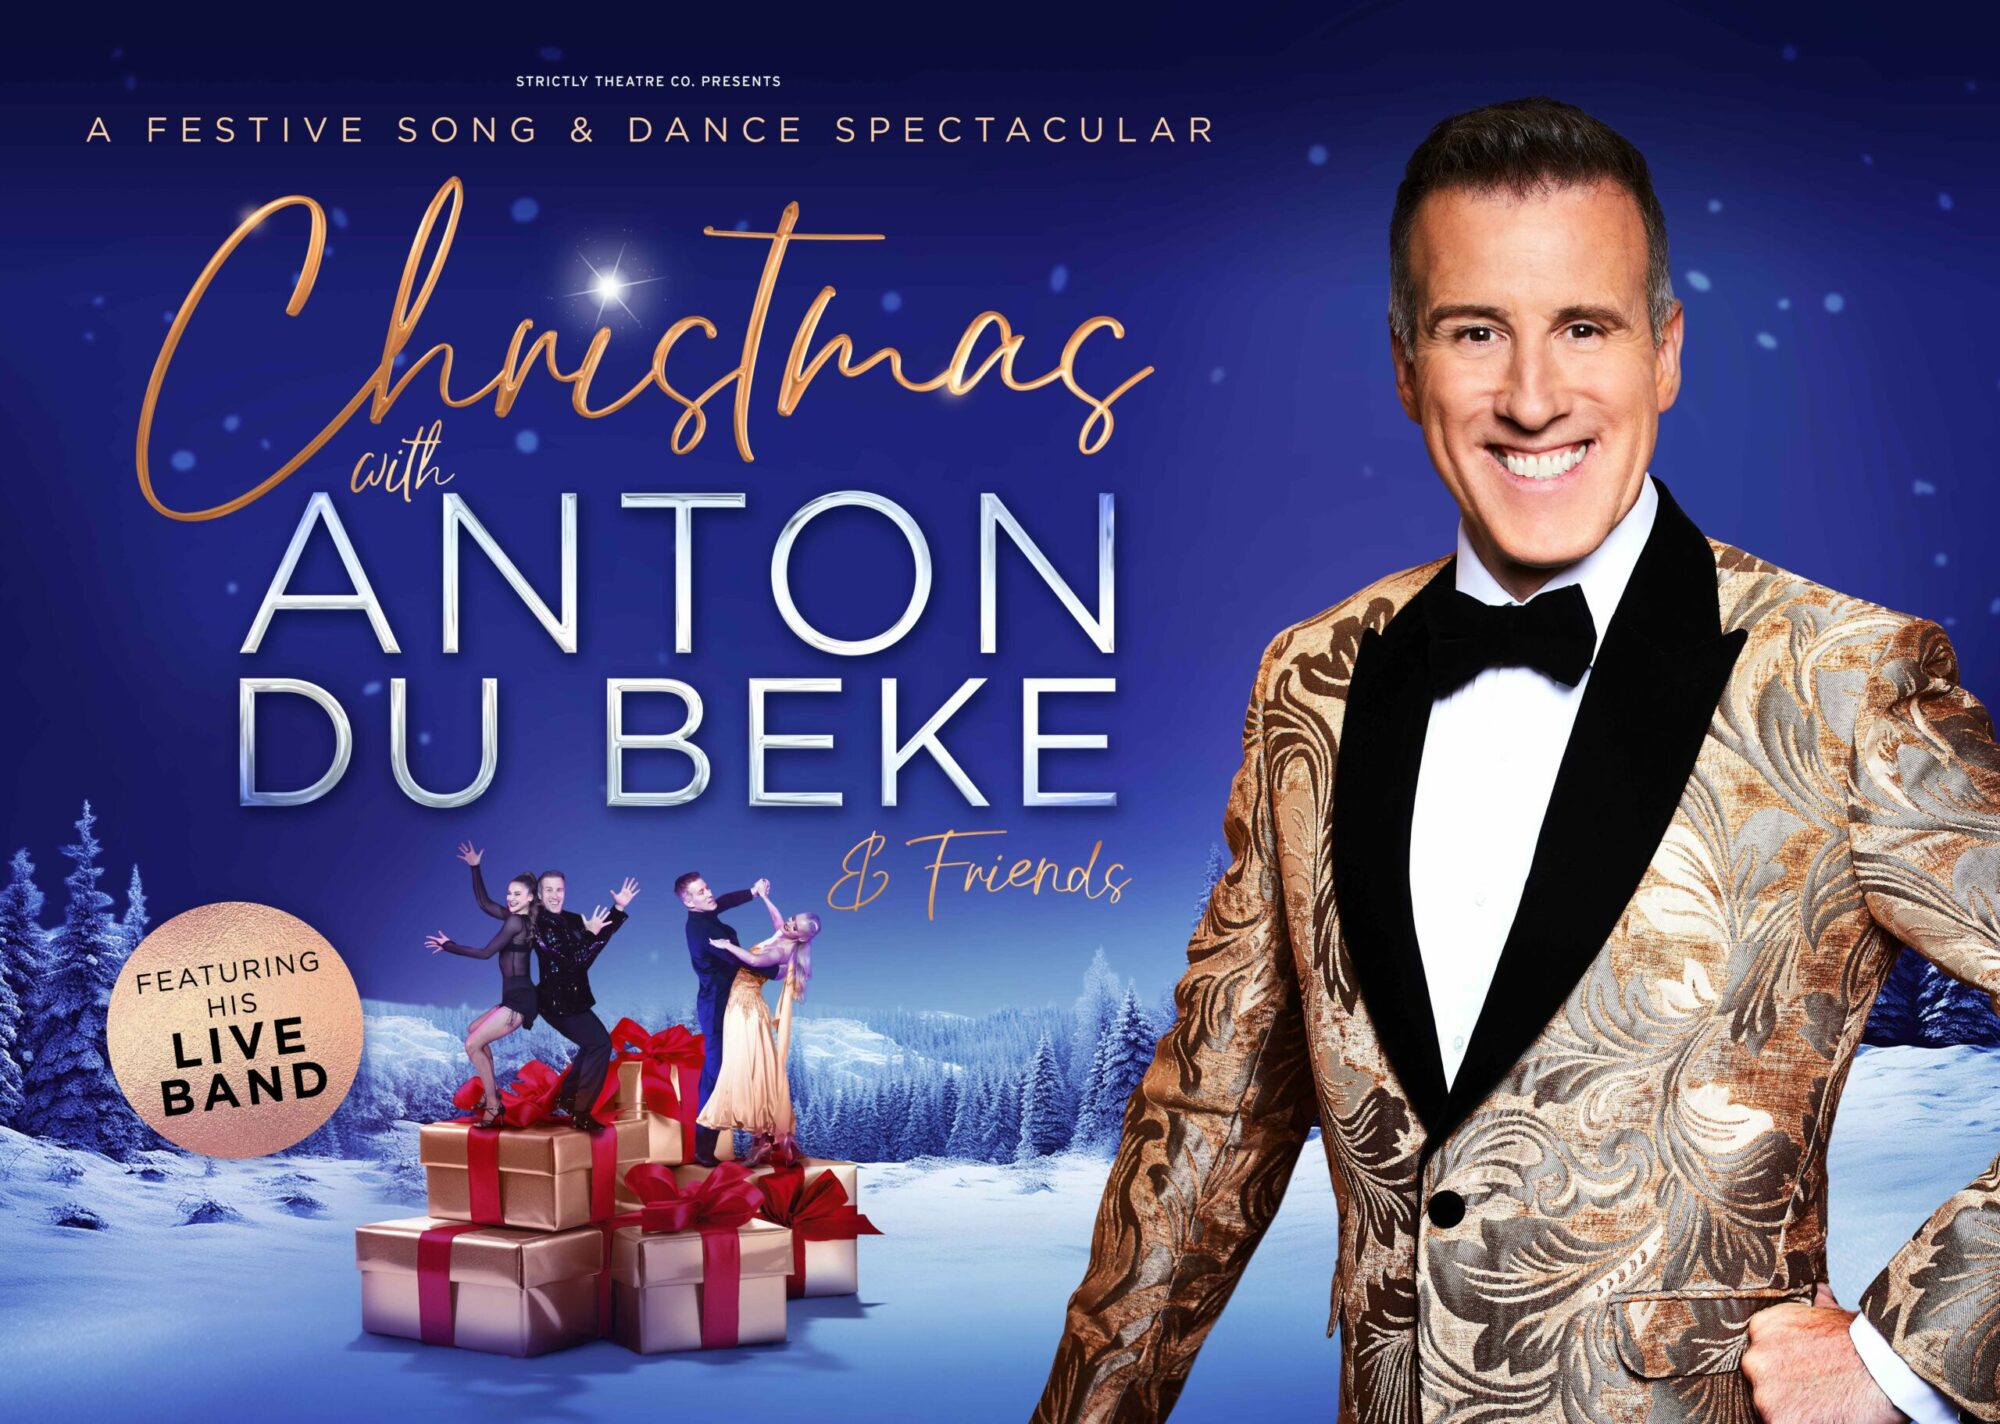 Image name Christmas with Anton Du Beke at York Barbican York scaled the 1 image from the post Christmas with Anton Du Beke at York Barbican, York in Yorkshire.com.